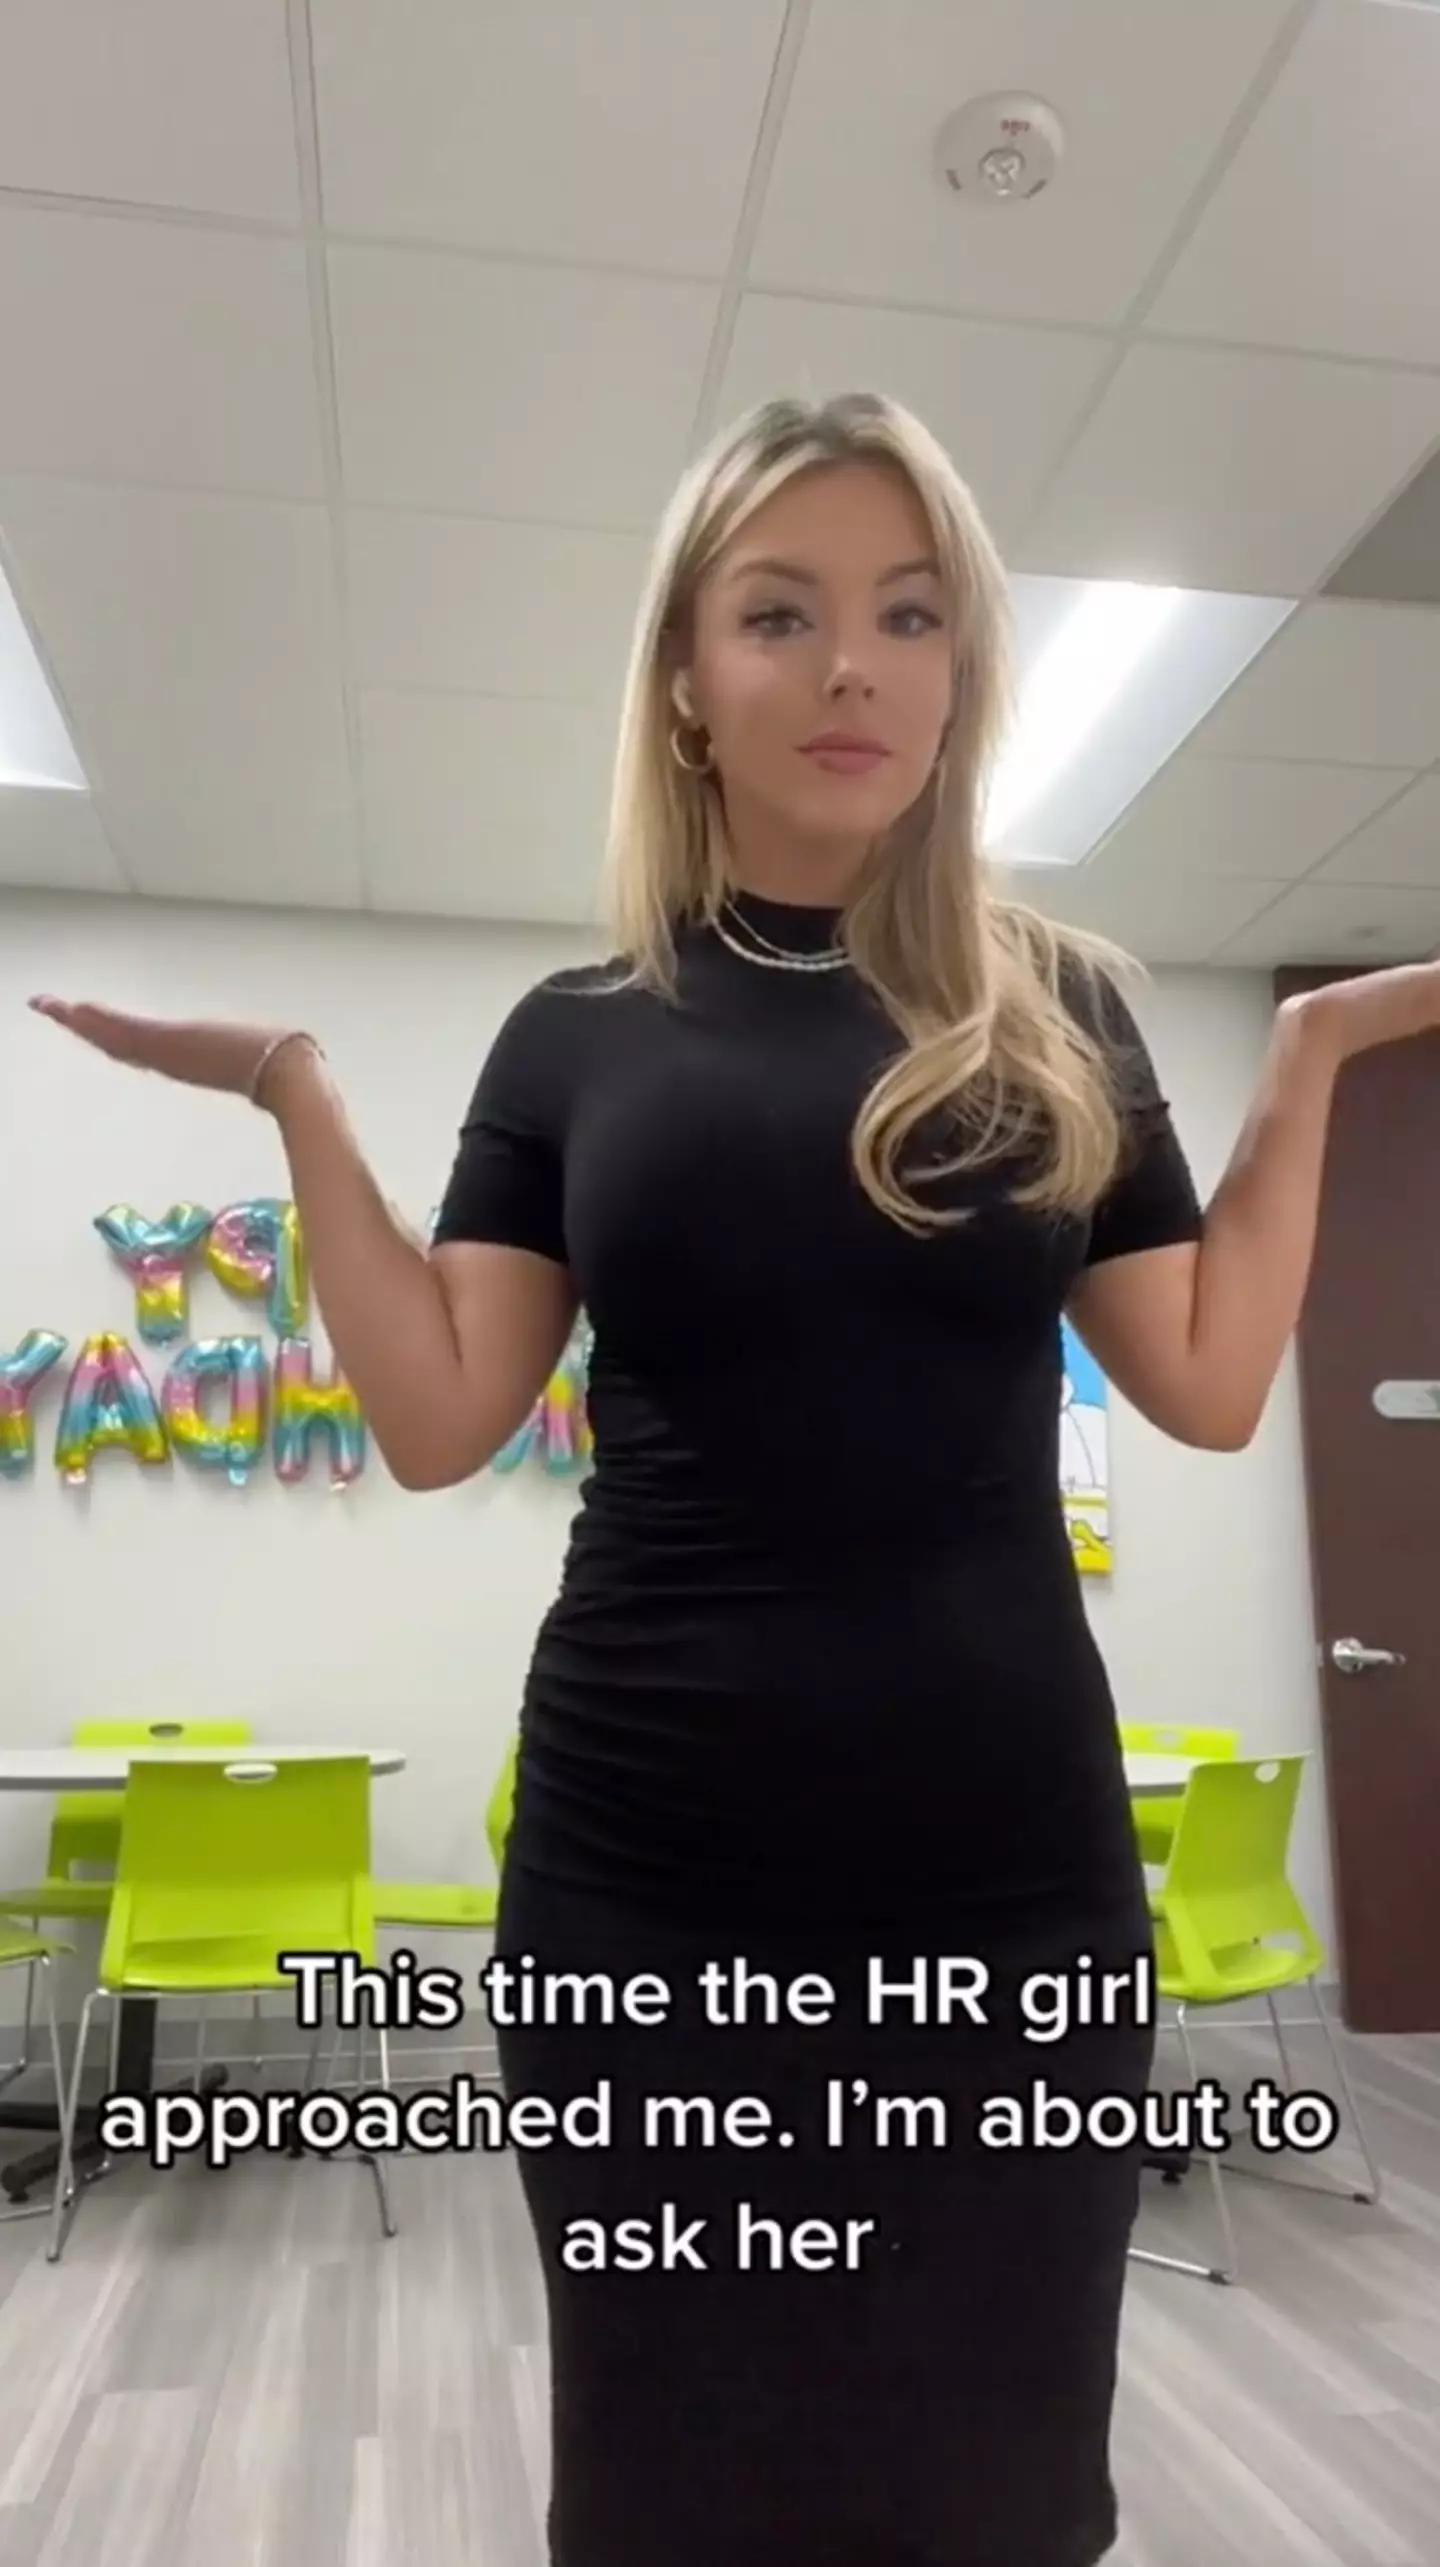 The worker filmed her meeting with the HR representative, who was heard saying: "I’m sorry, you still can’t wear that. It’s way too revealing and distracting."